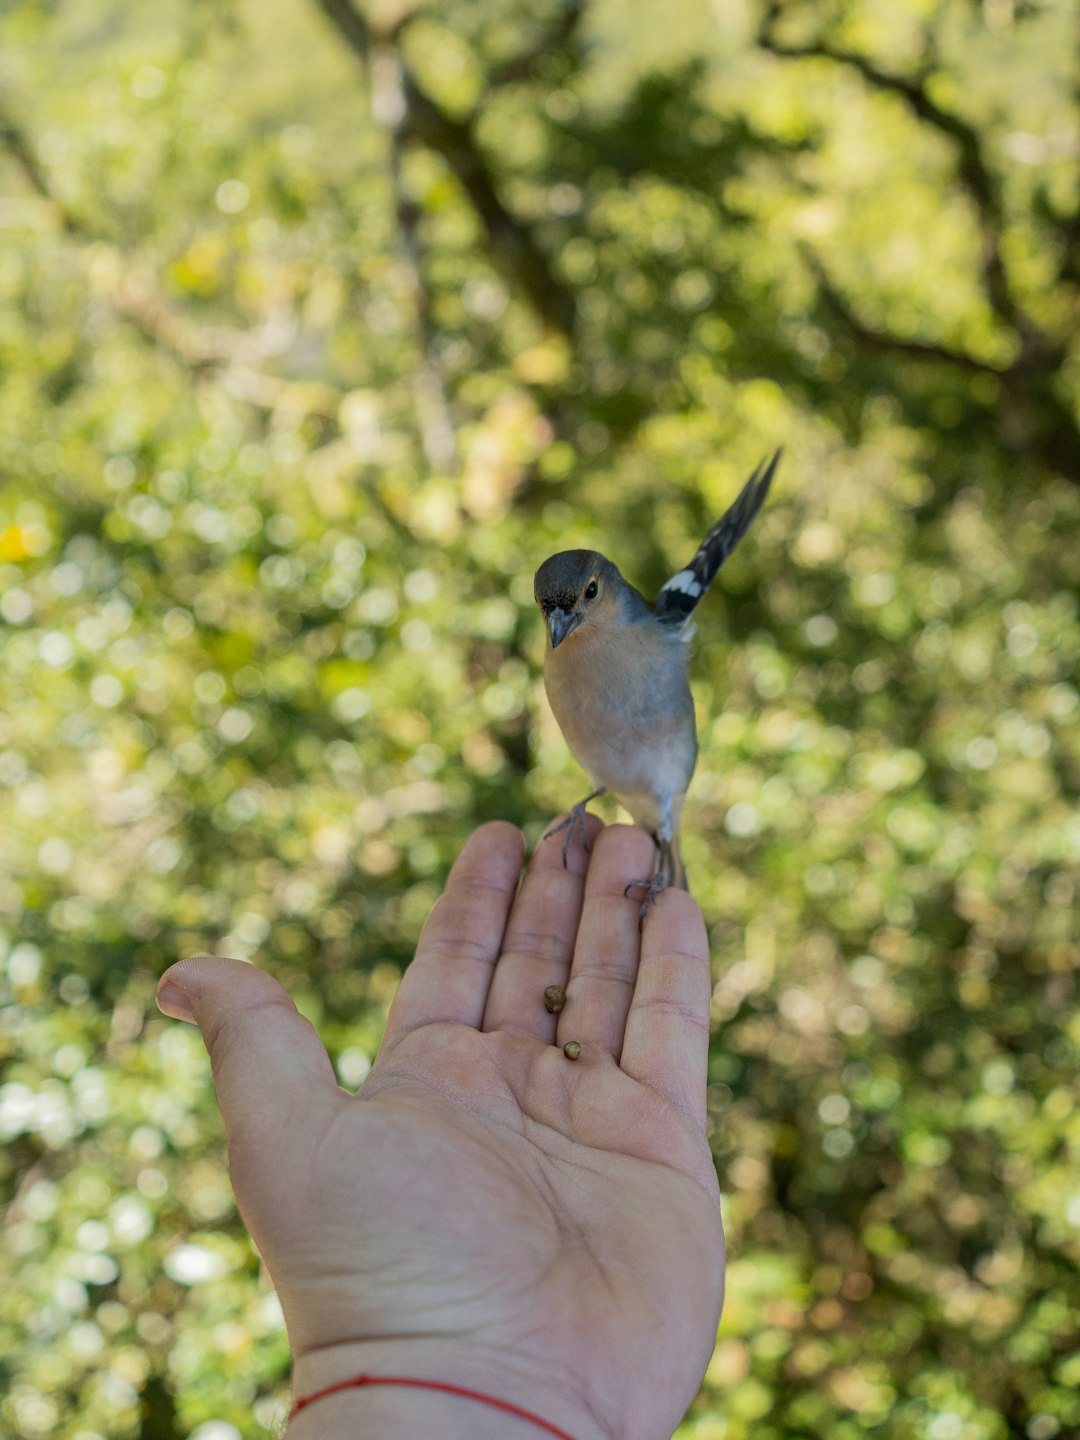 gray and white bird on persons hand